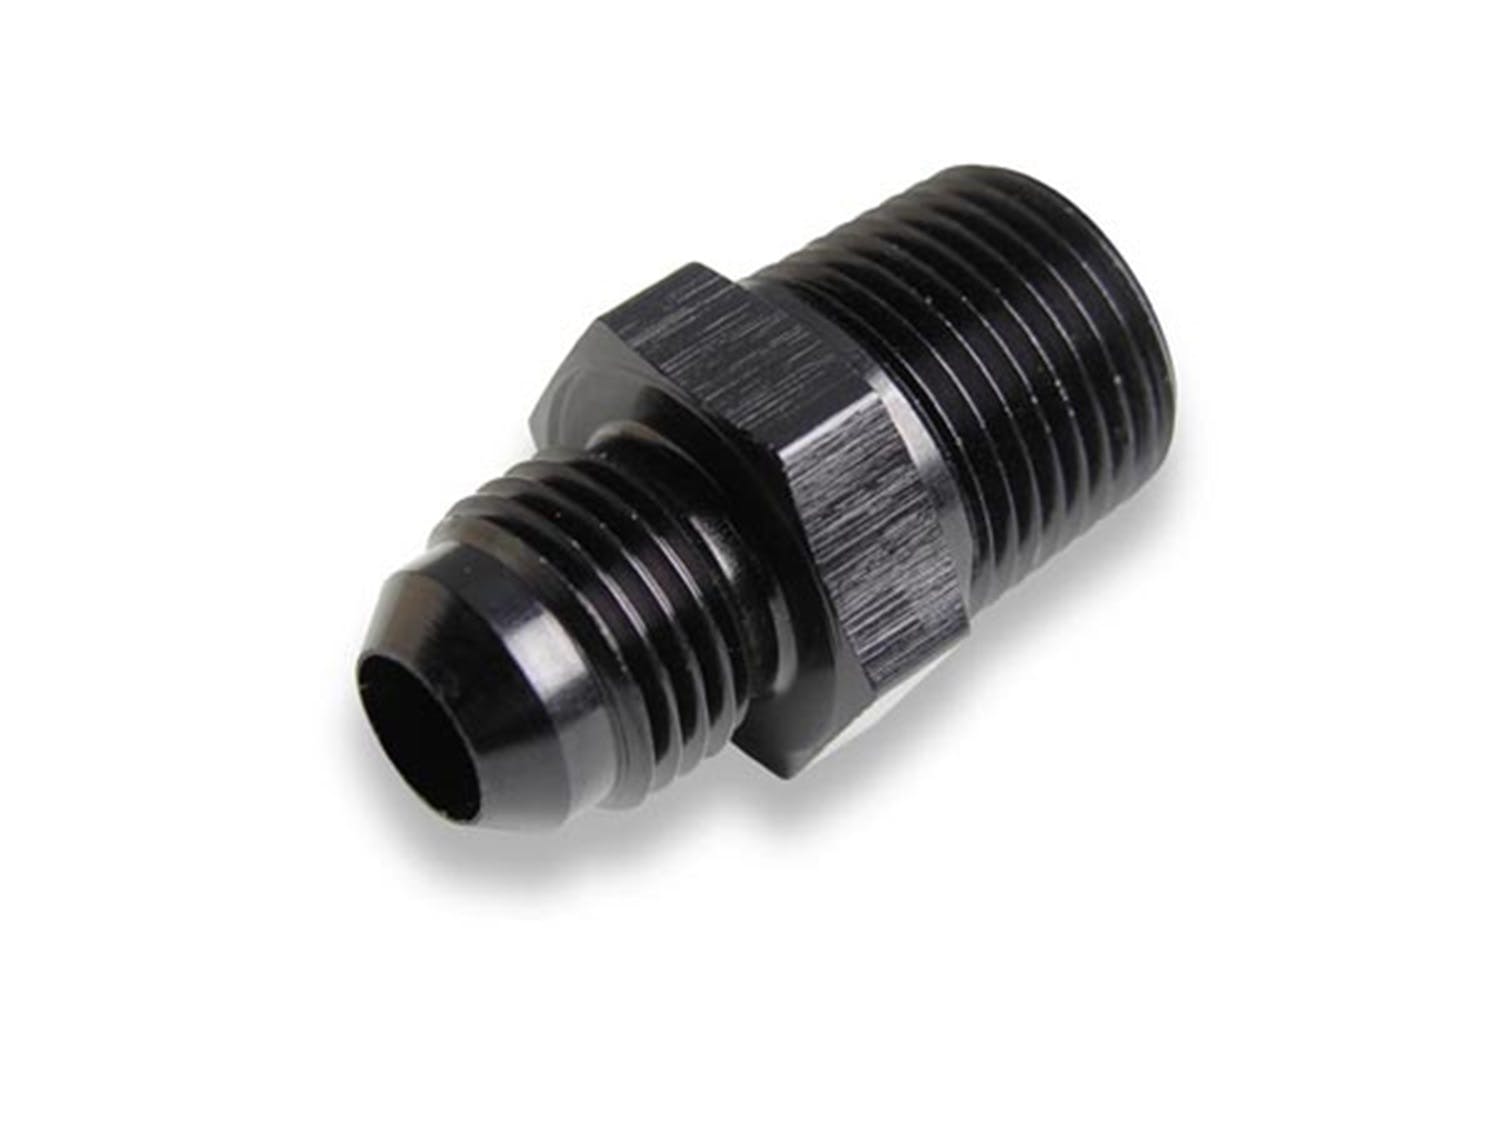 NOS 17979NOS -6AN TO 1/4 NPT ADAPTER, STRAIGHT, BLACK